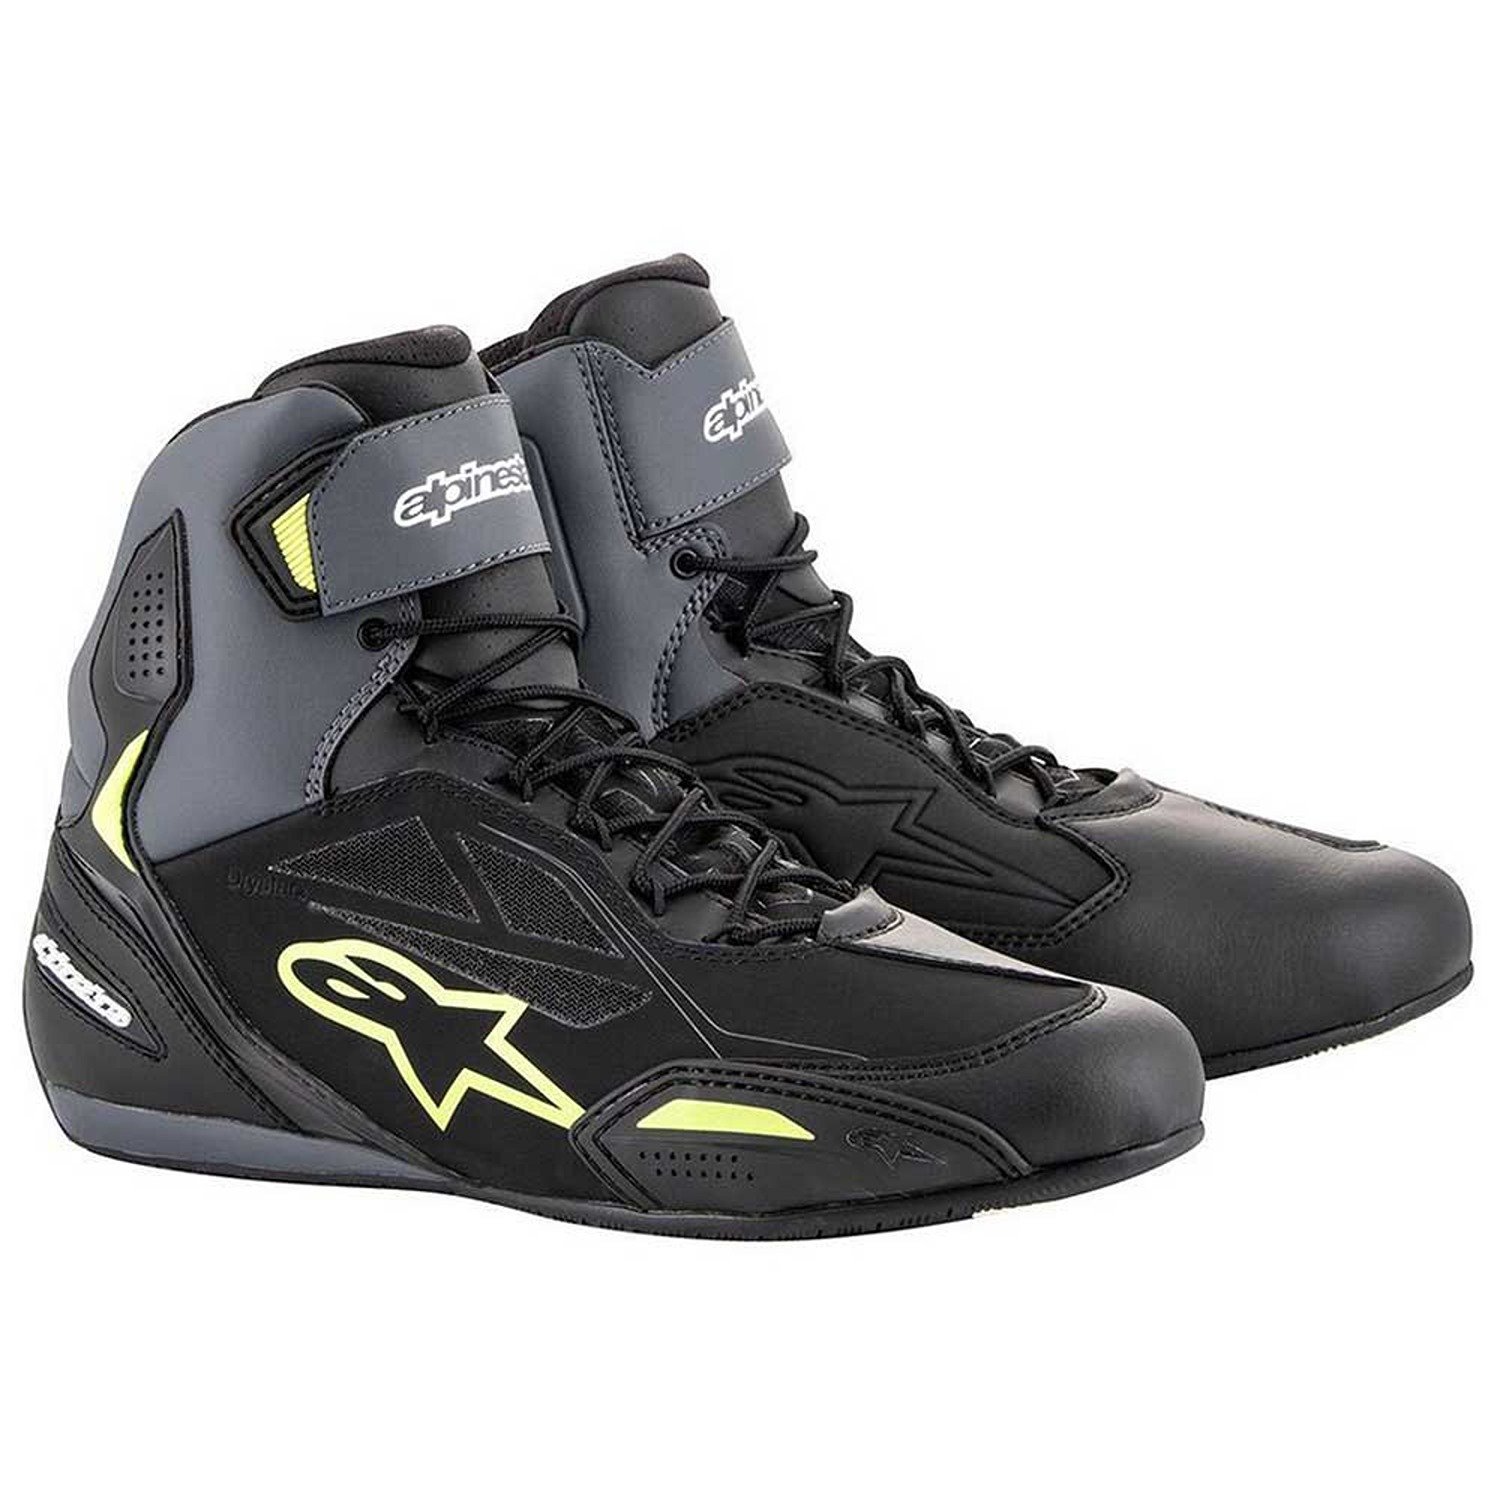 Image of EU Alpinestars Faster-3 Shoes Black Yellow Fluo Taille US 13